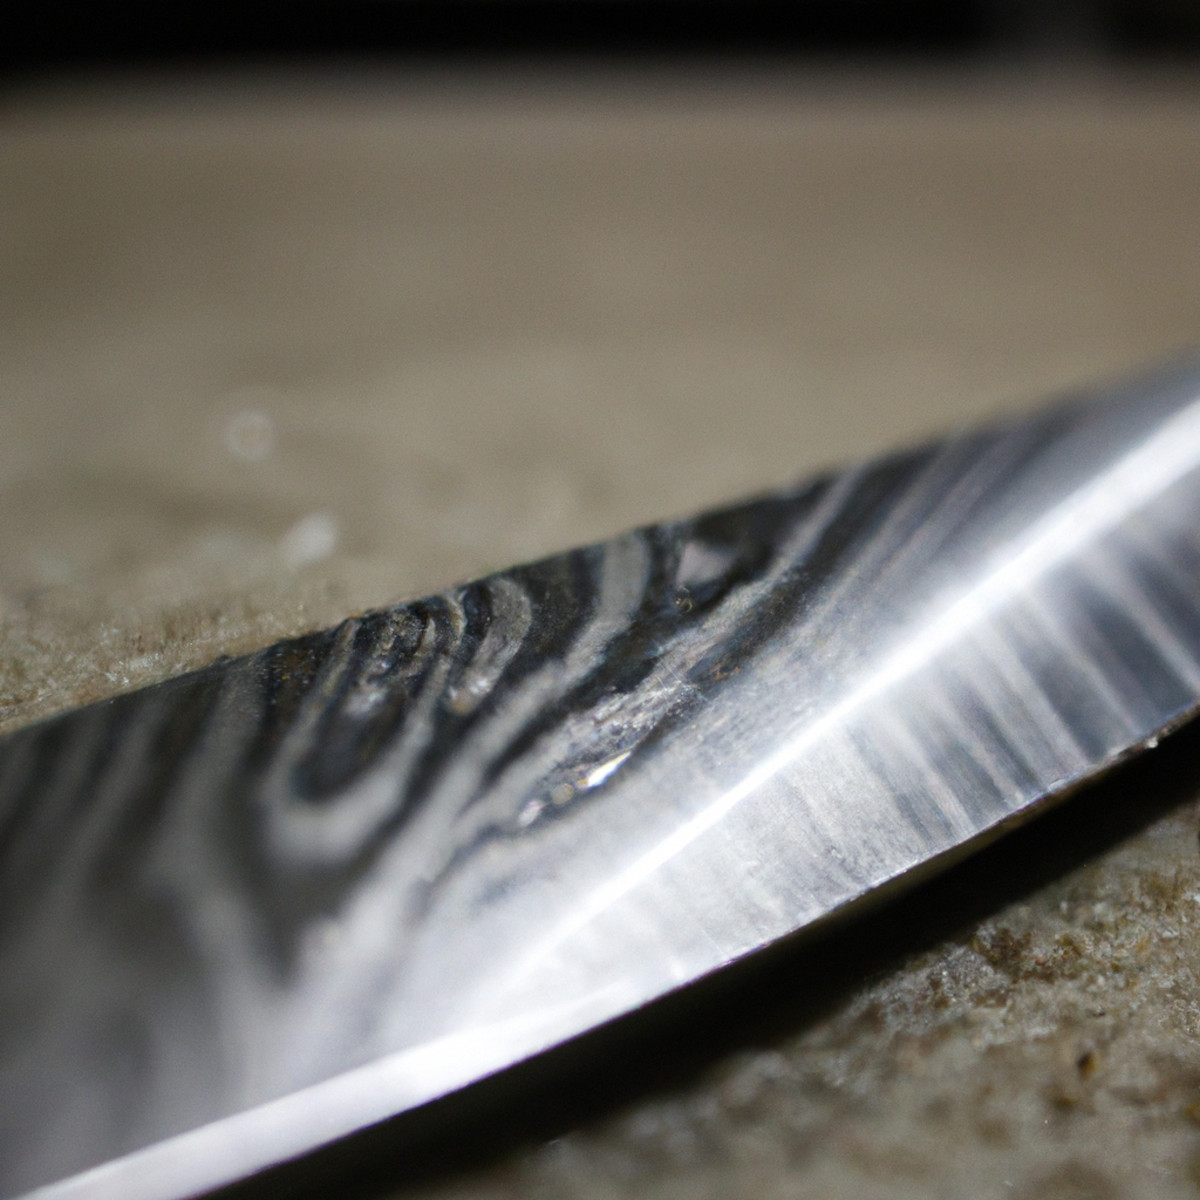 Damascus Knife Finish- For Durability and a Unique Look